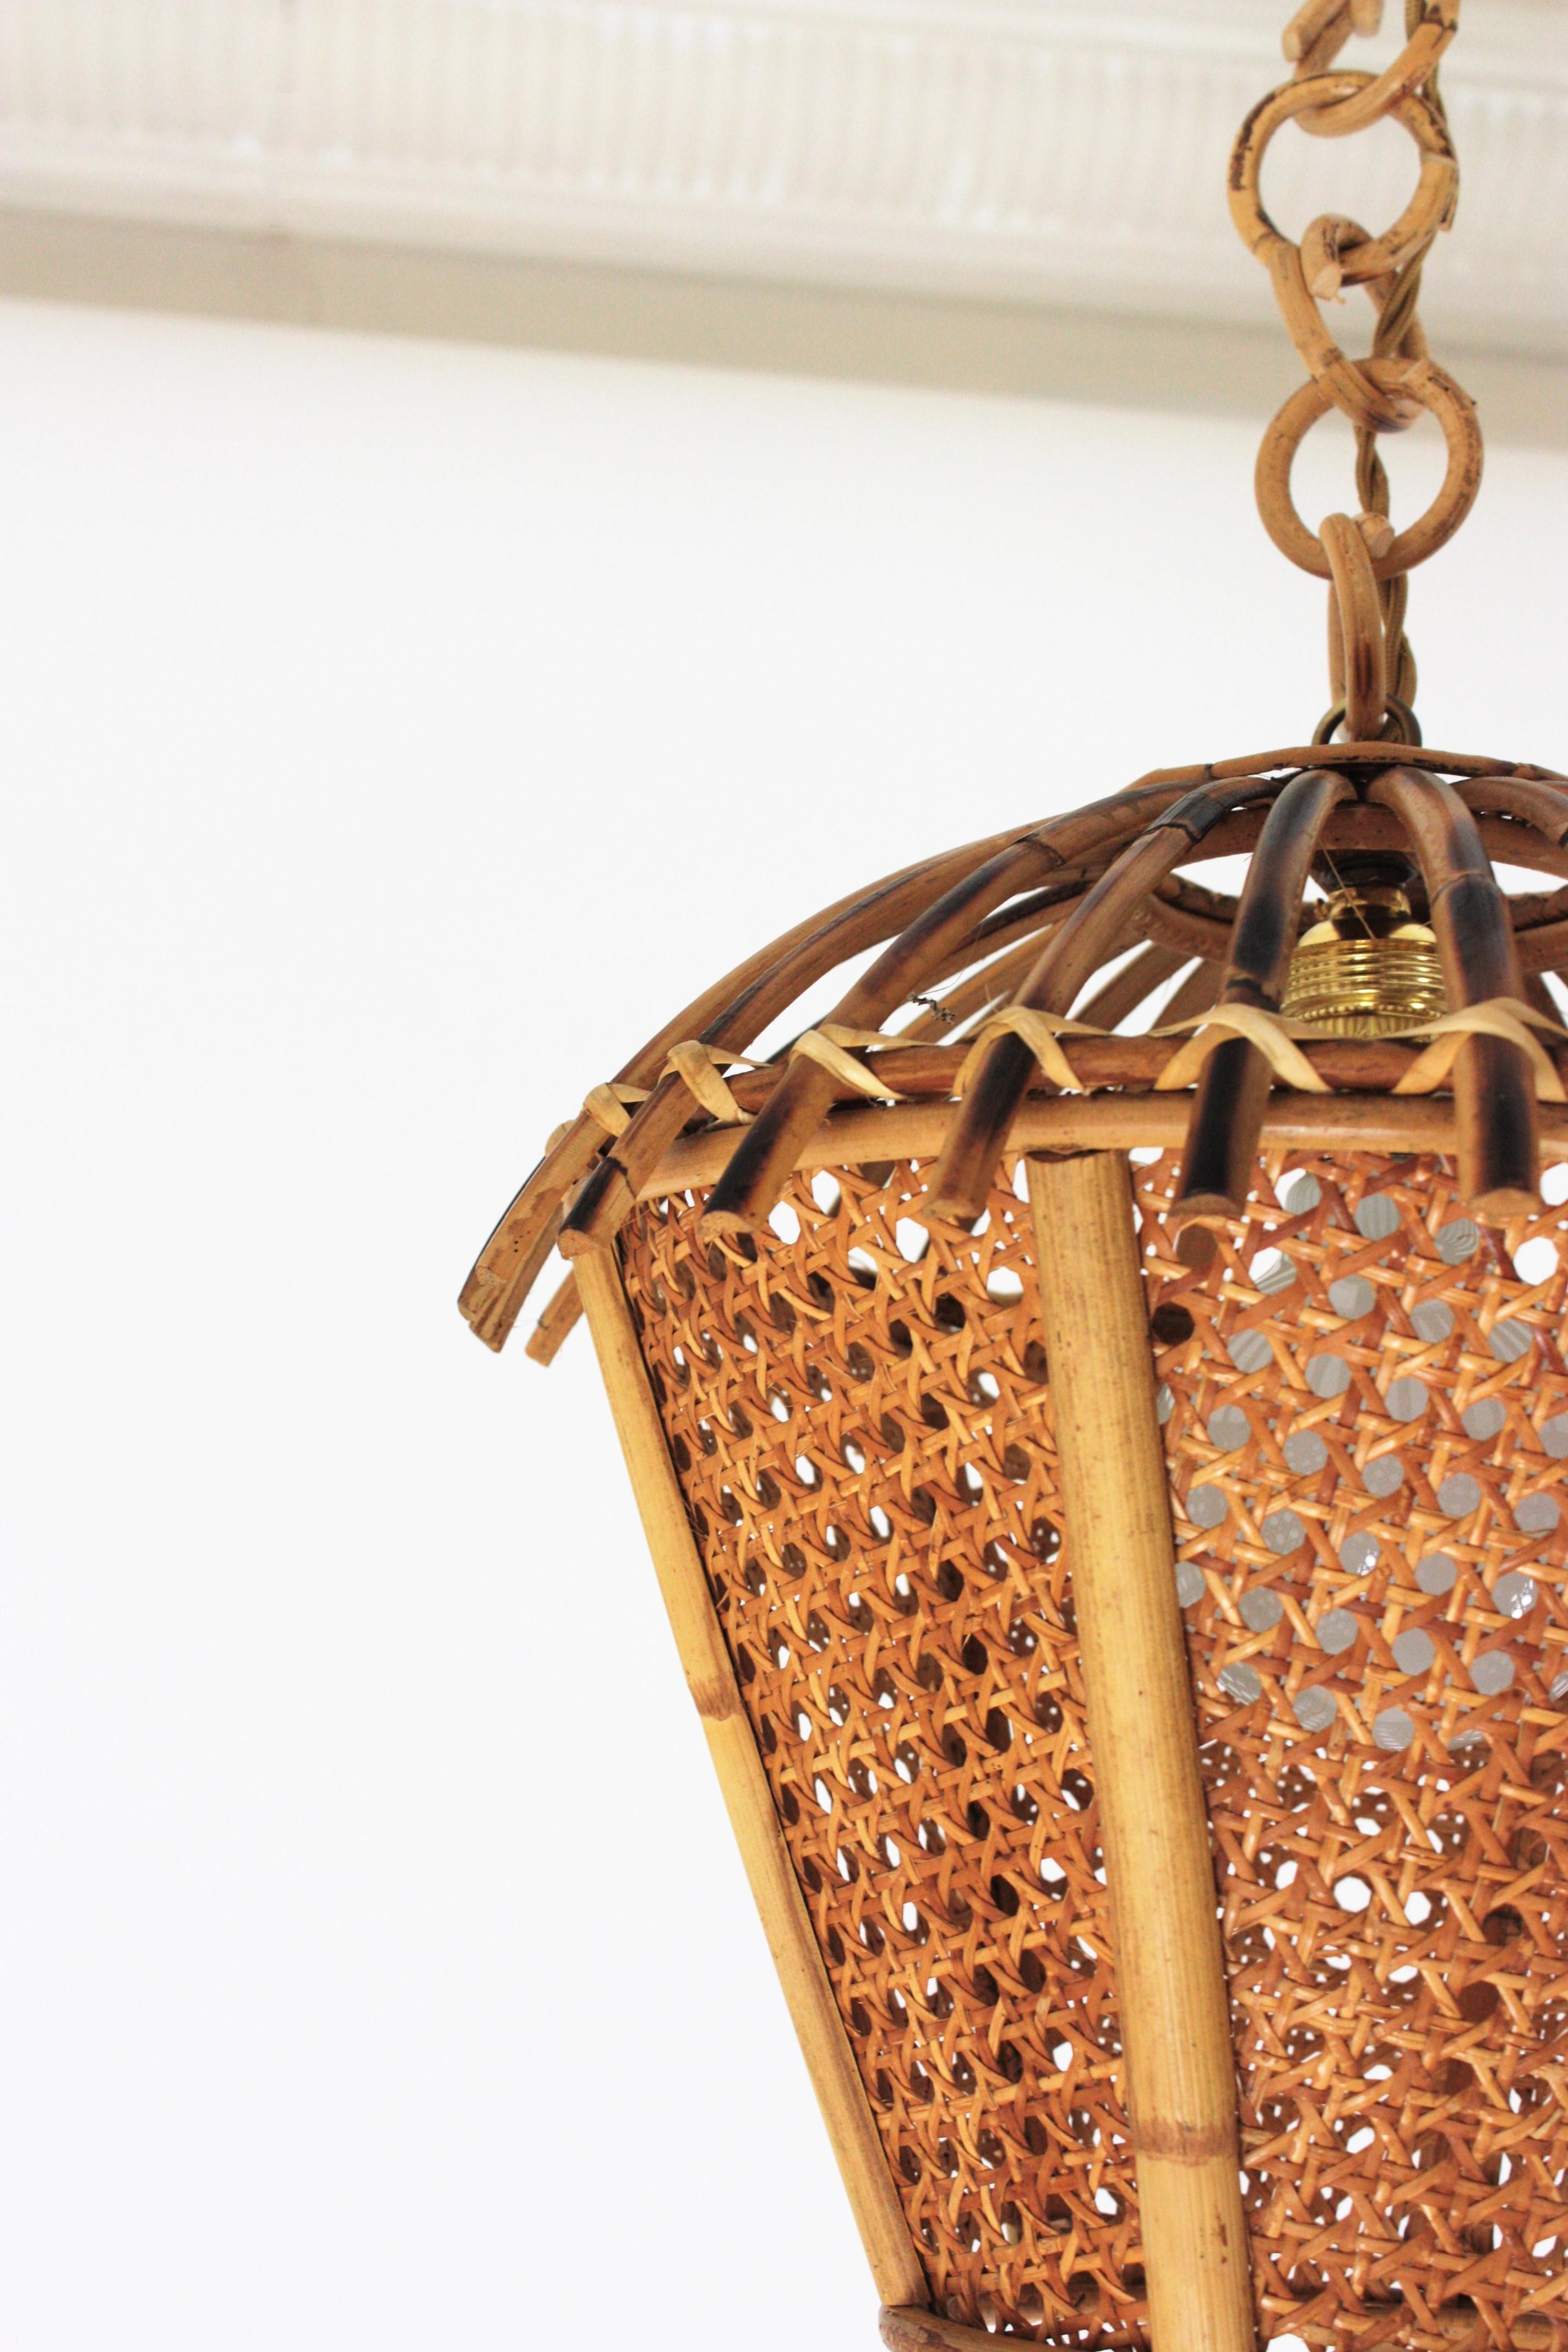 Italian Modernist Rattan and Wicker Wire Pagoda Pendant or Hanging Light, 1960s For Sale 7